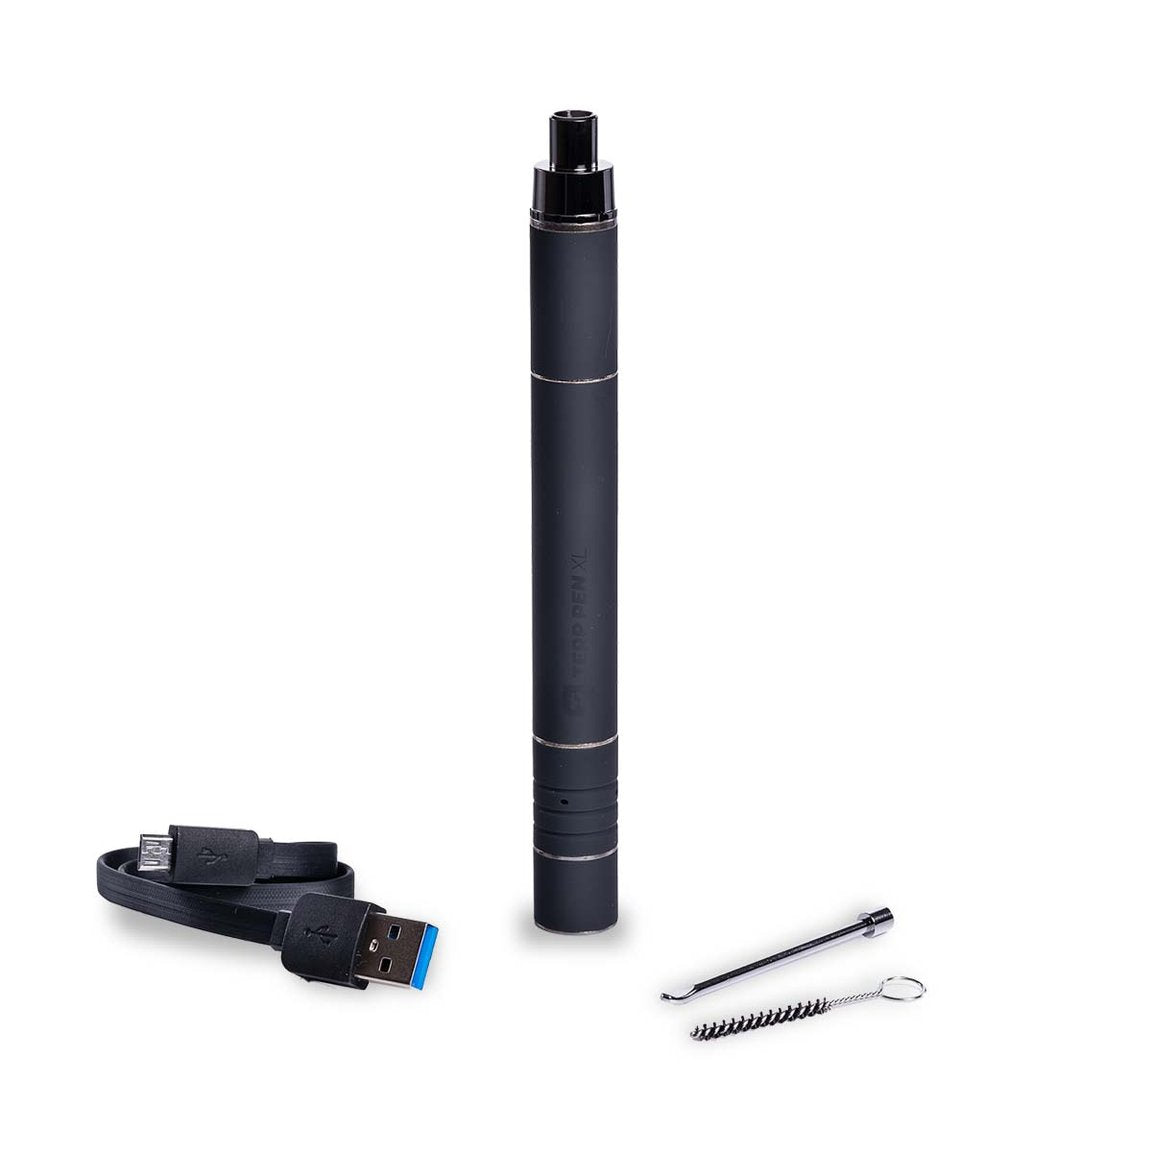 Boundless Terp Pen XL Vaporizer by Boundless | Mission Dispensary